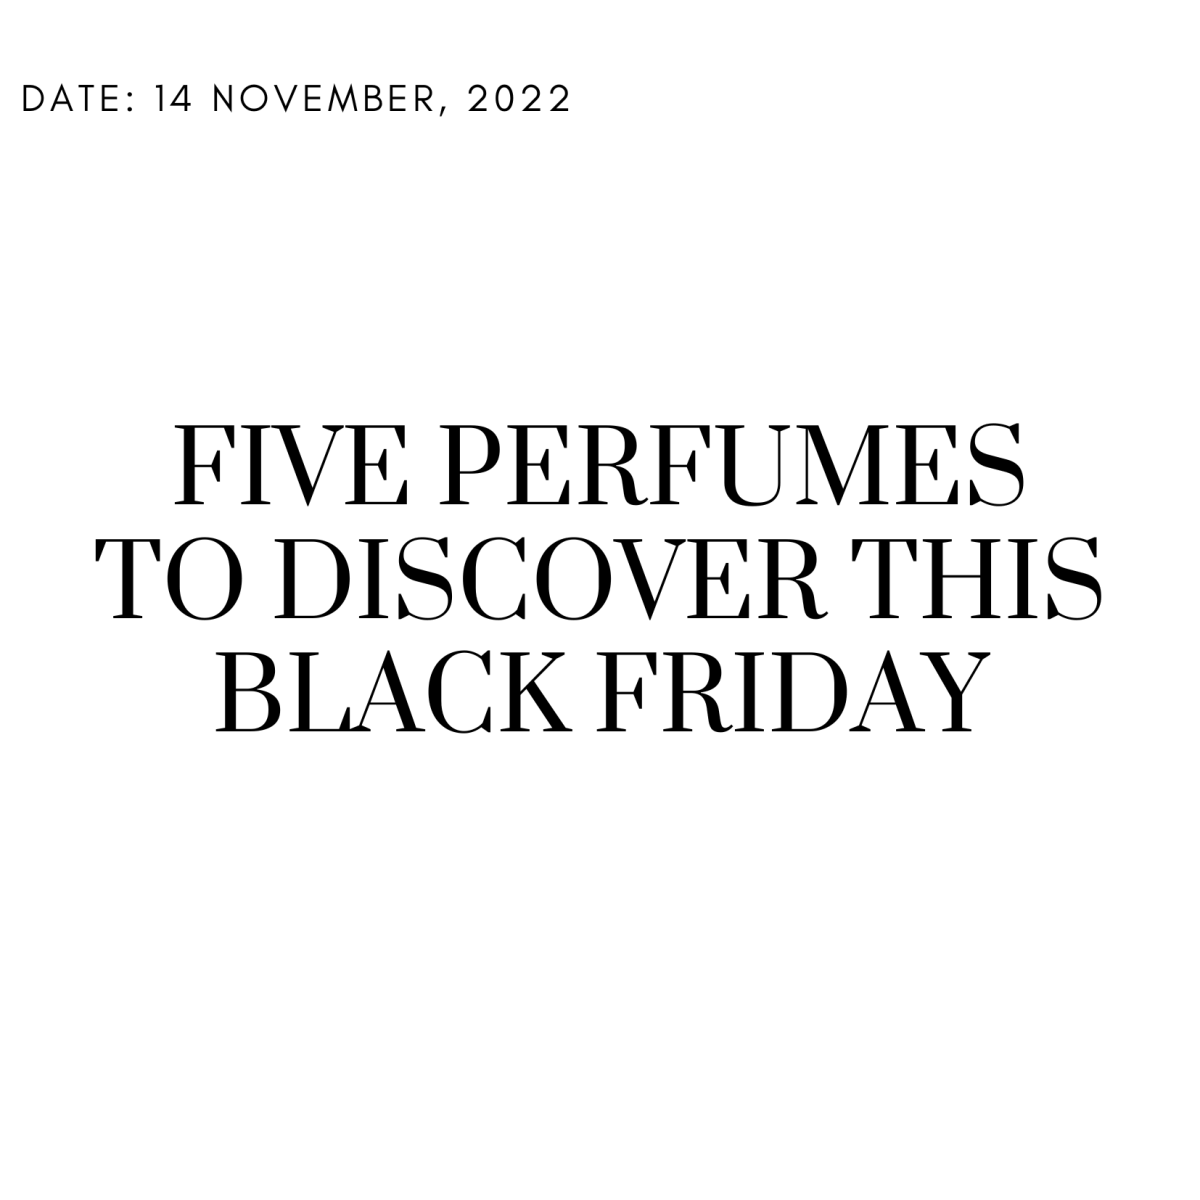 Five Perfumes To Discover Black Friday